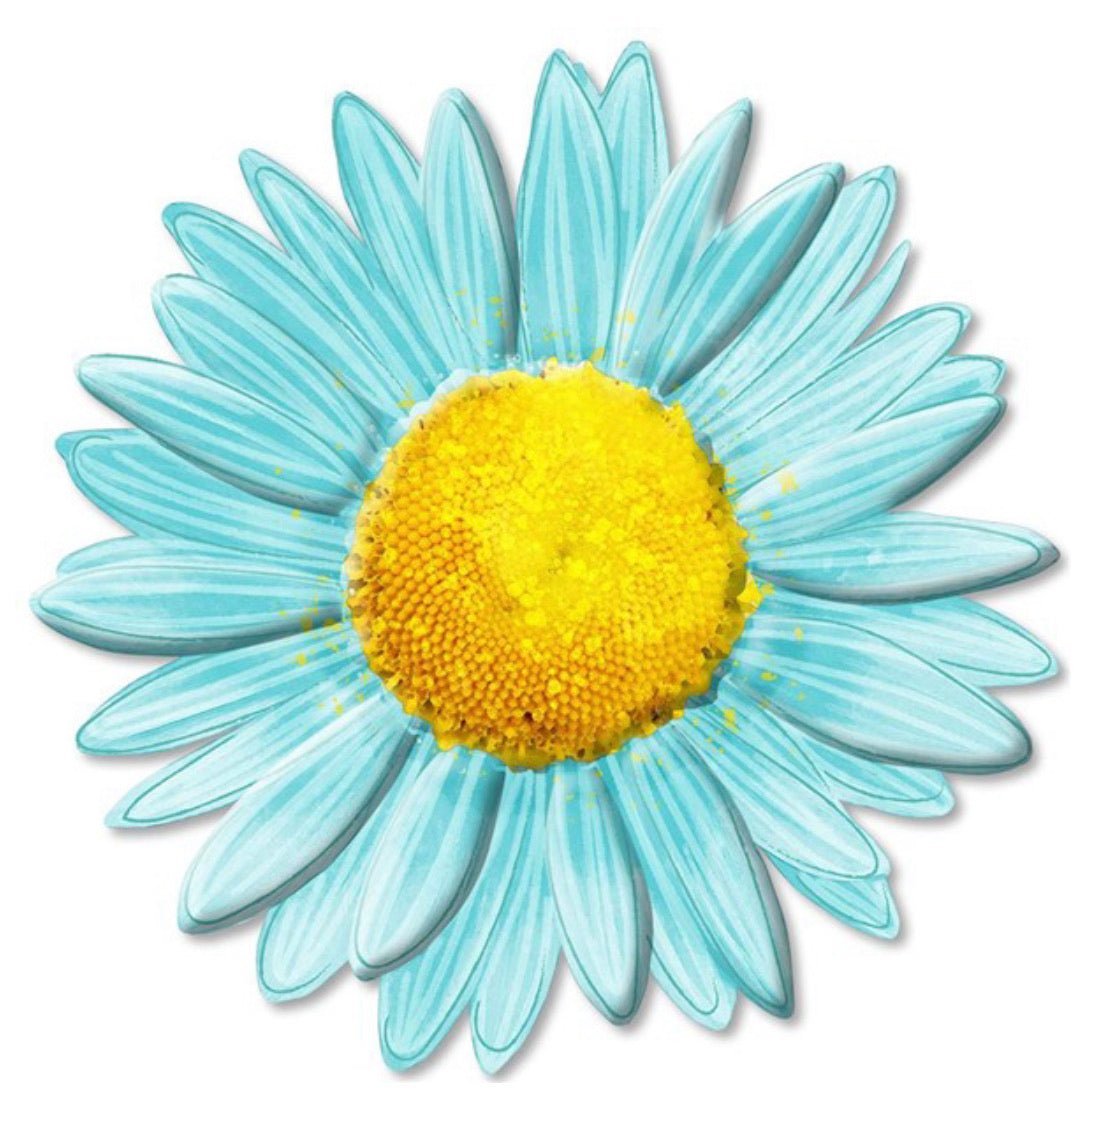 Metal embossed aqua daisy sign - md066033 - Greenery Marketsigns for wreathsmd066033